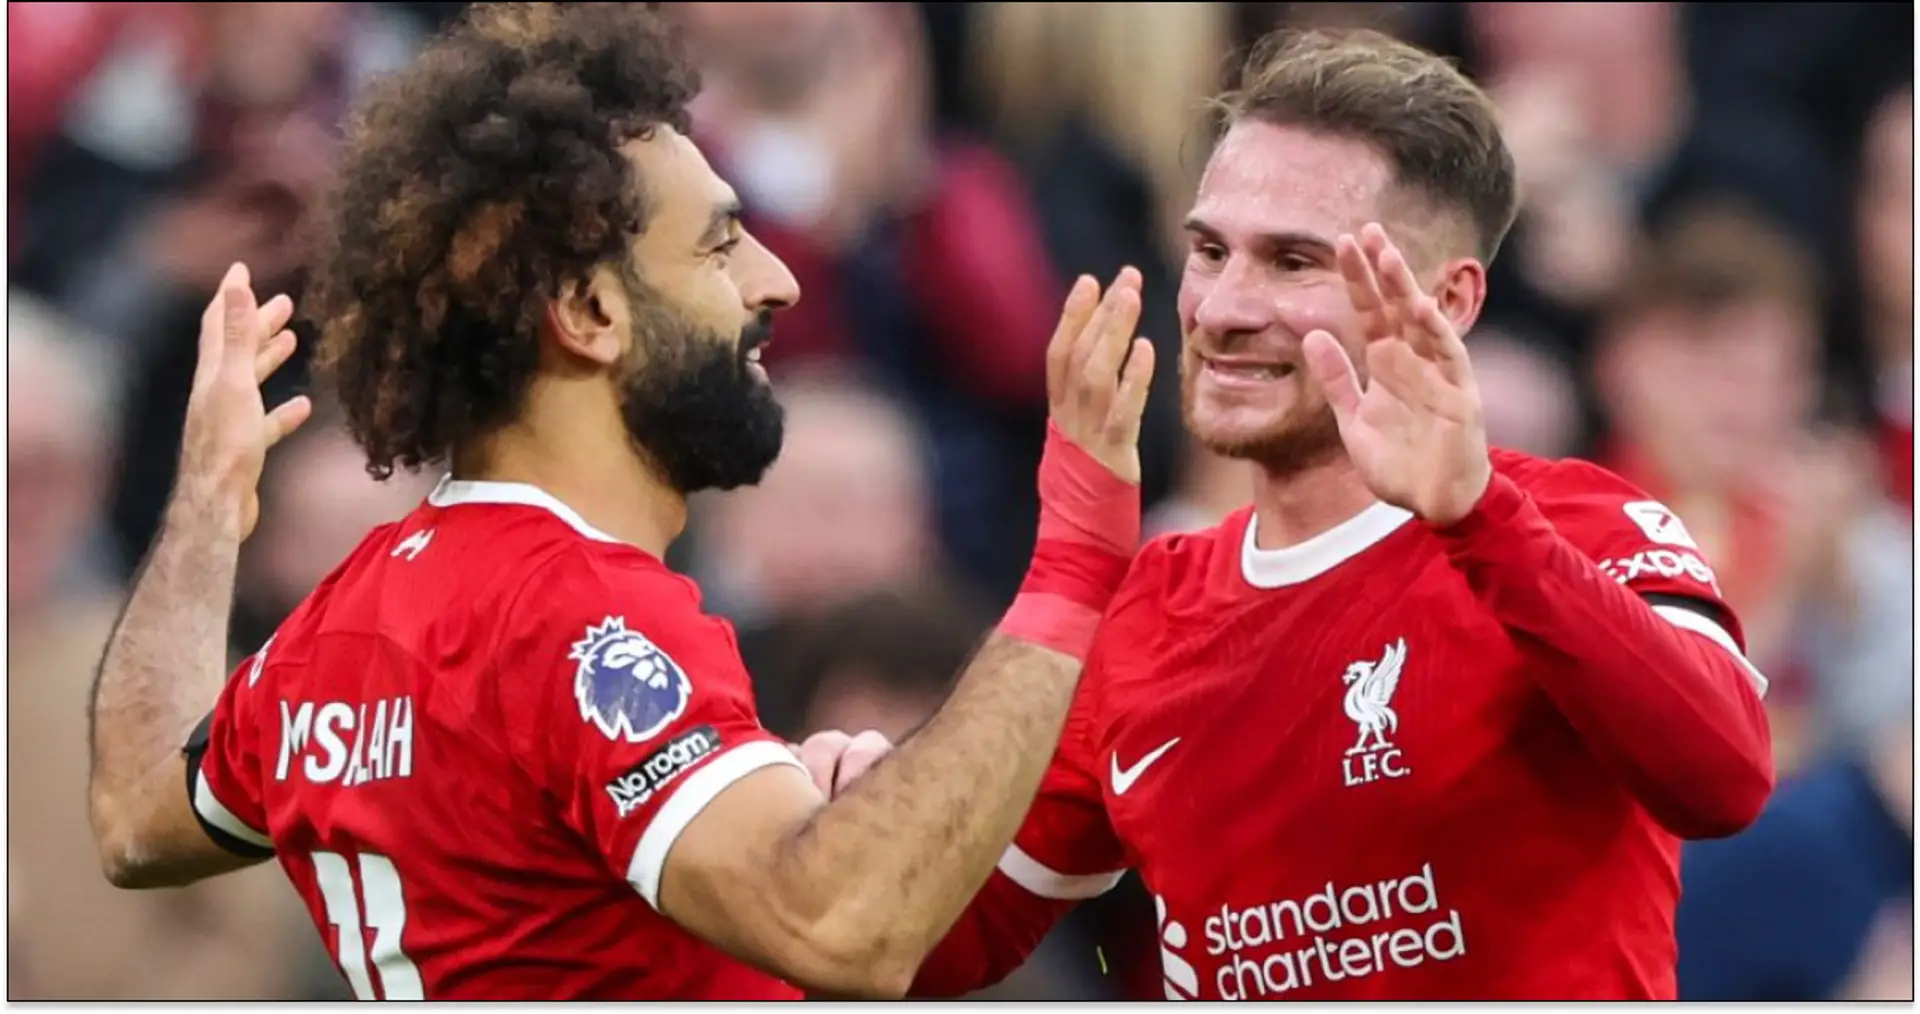 'He asked for passes during the week': Mac Allister talks Salah connection after assisting Mo v Brighton